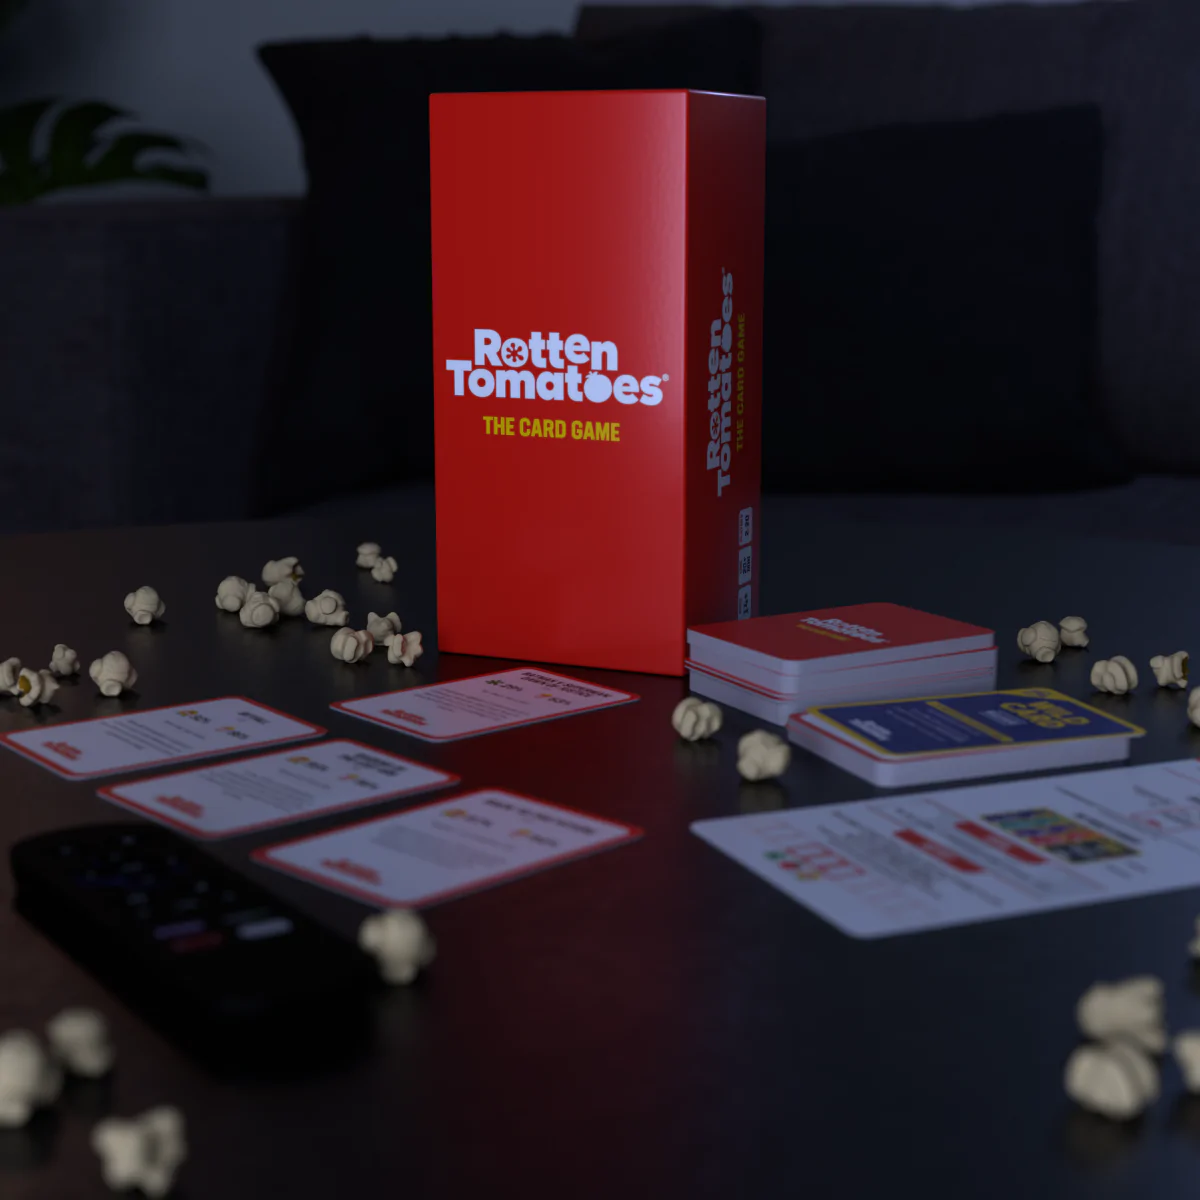 Rotten Tomatoes: The Card Game box and cards